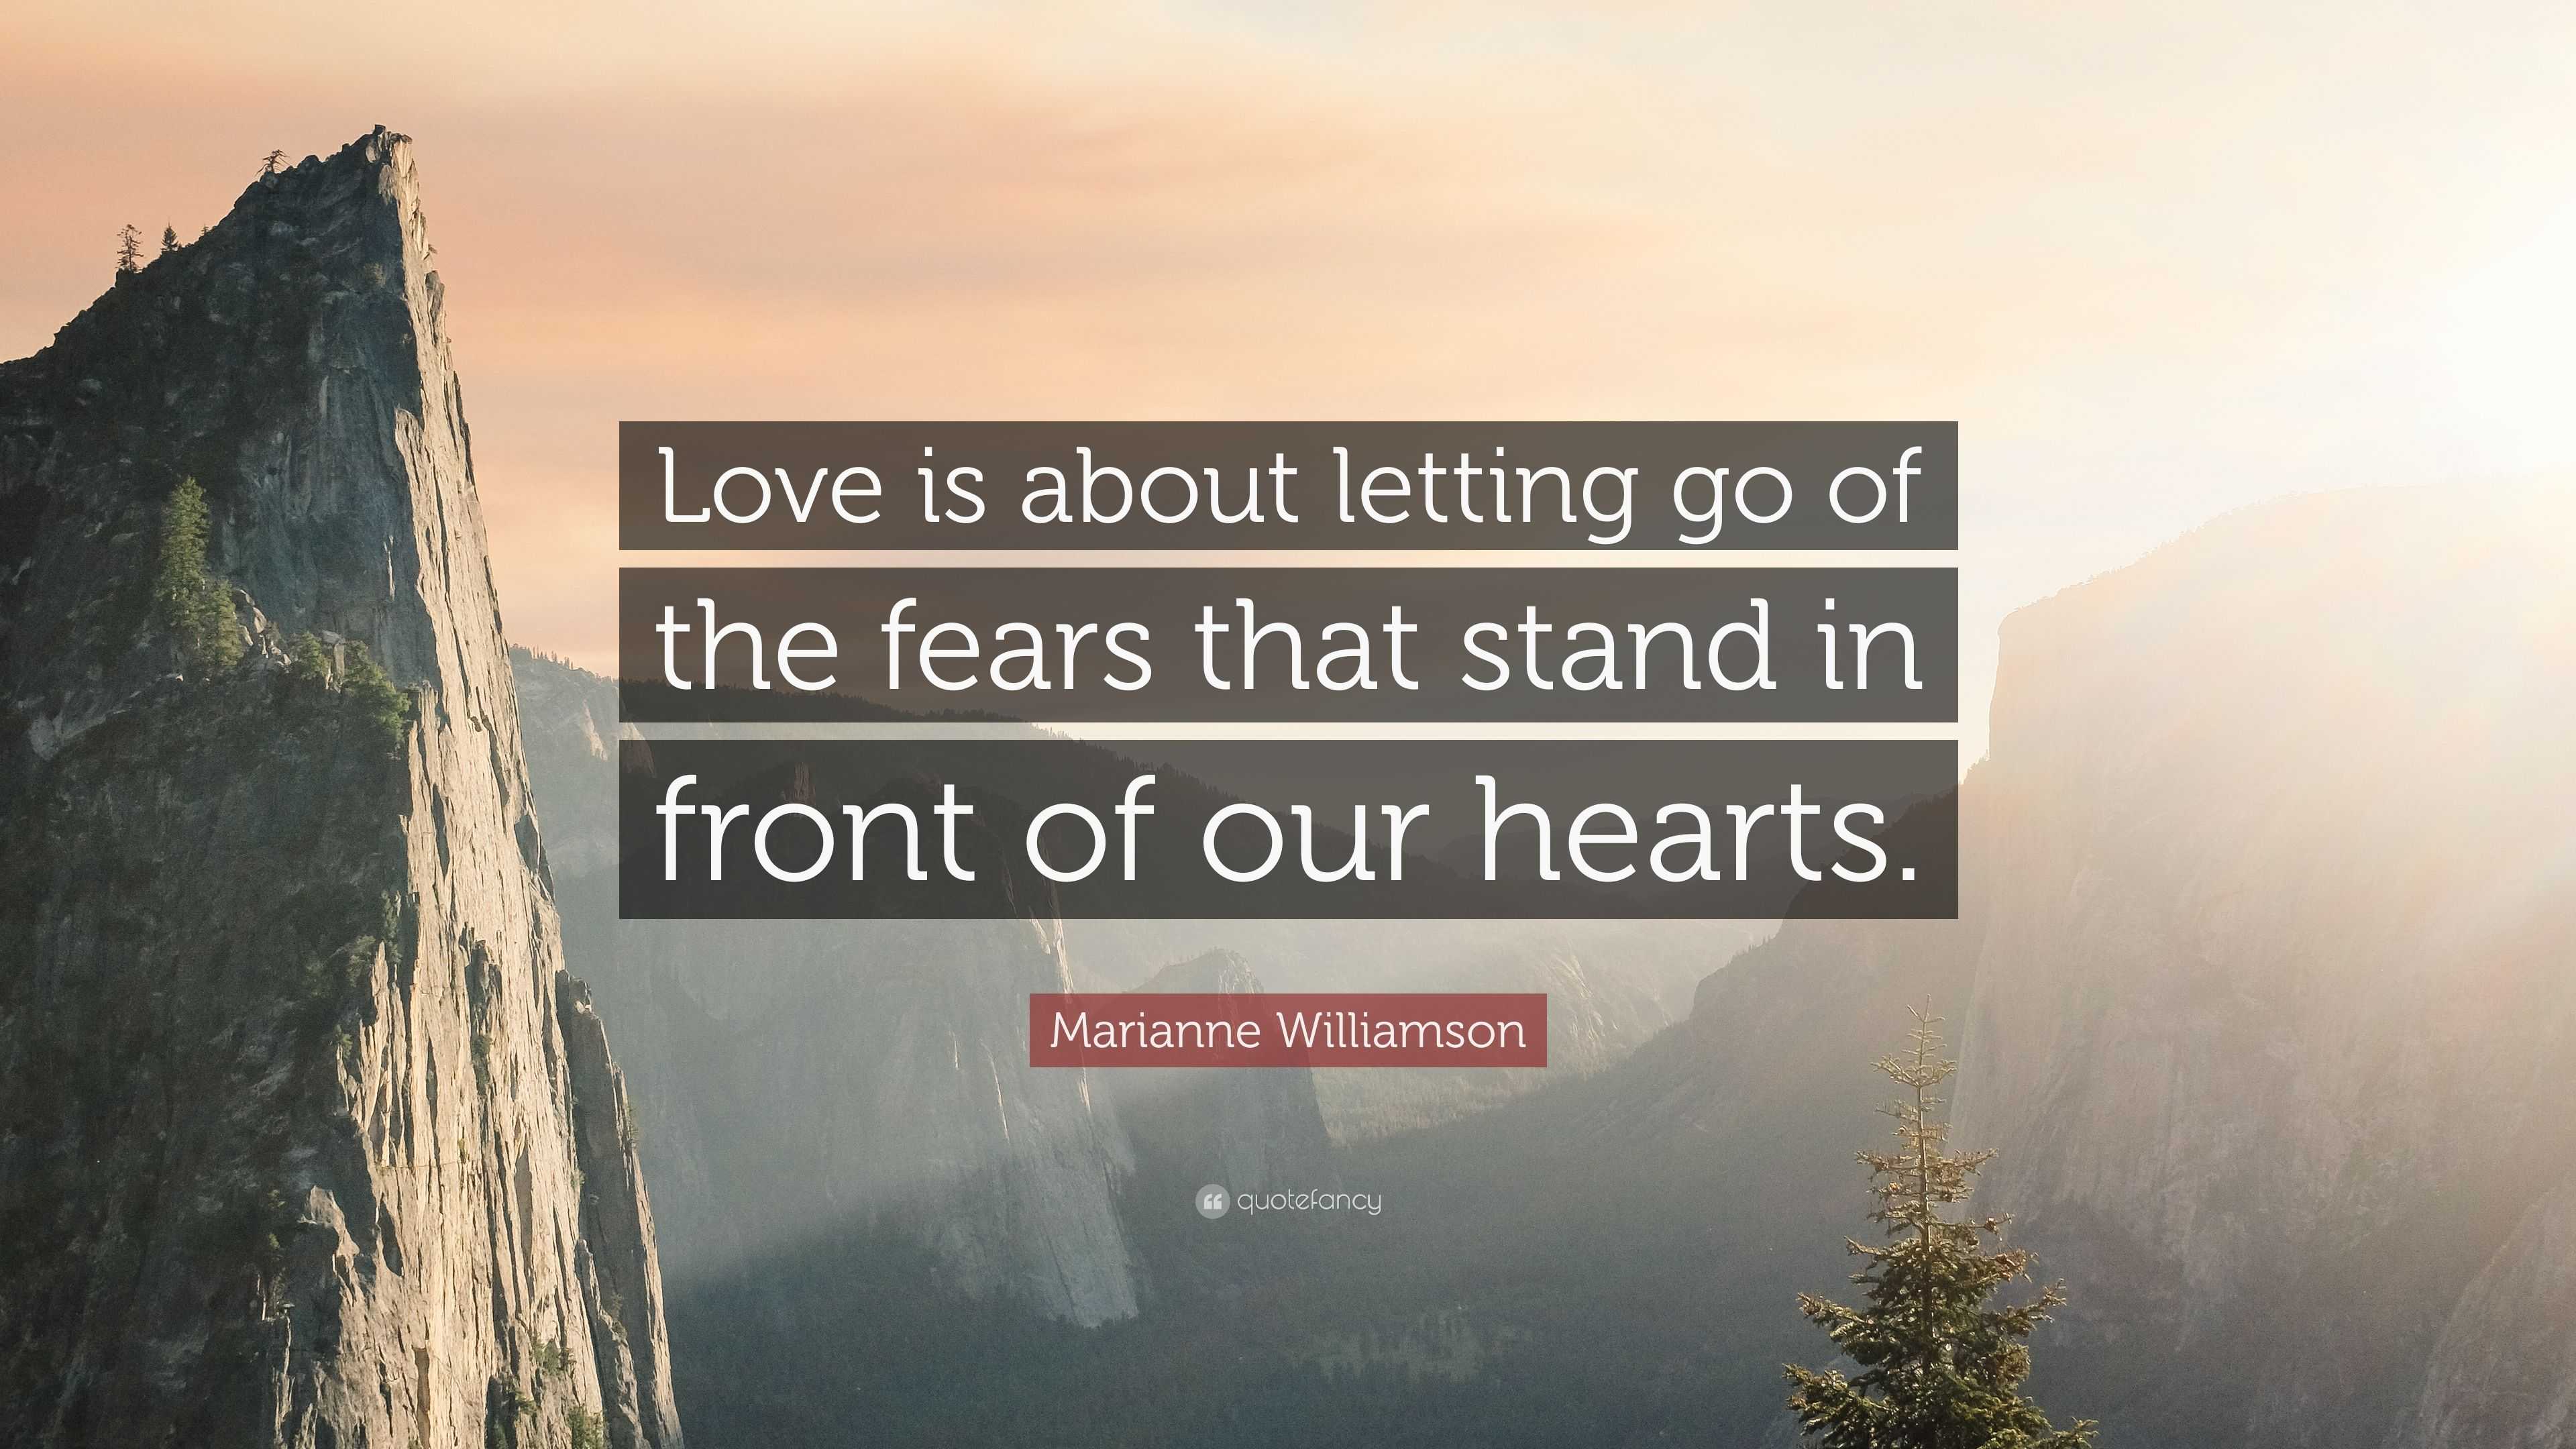 Marianne Williamson Quote “love Is About Letting Go Of The Fears That Stand In Front Of Our